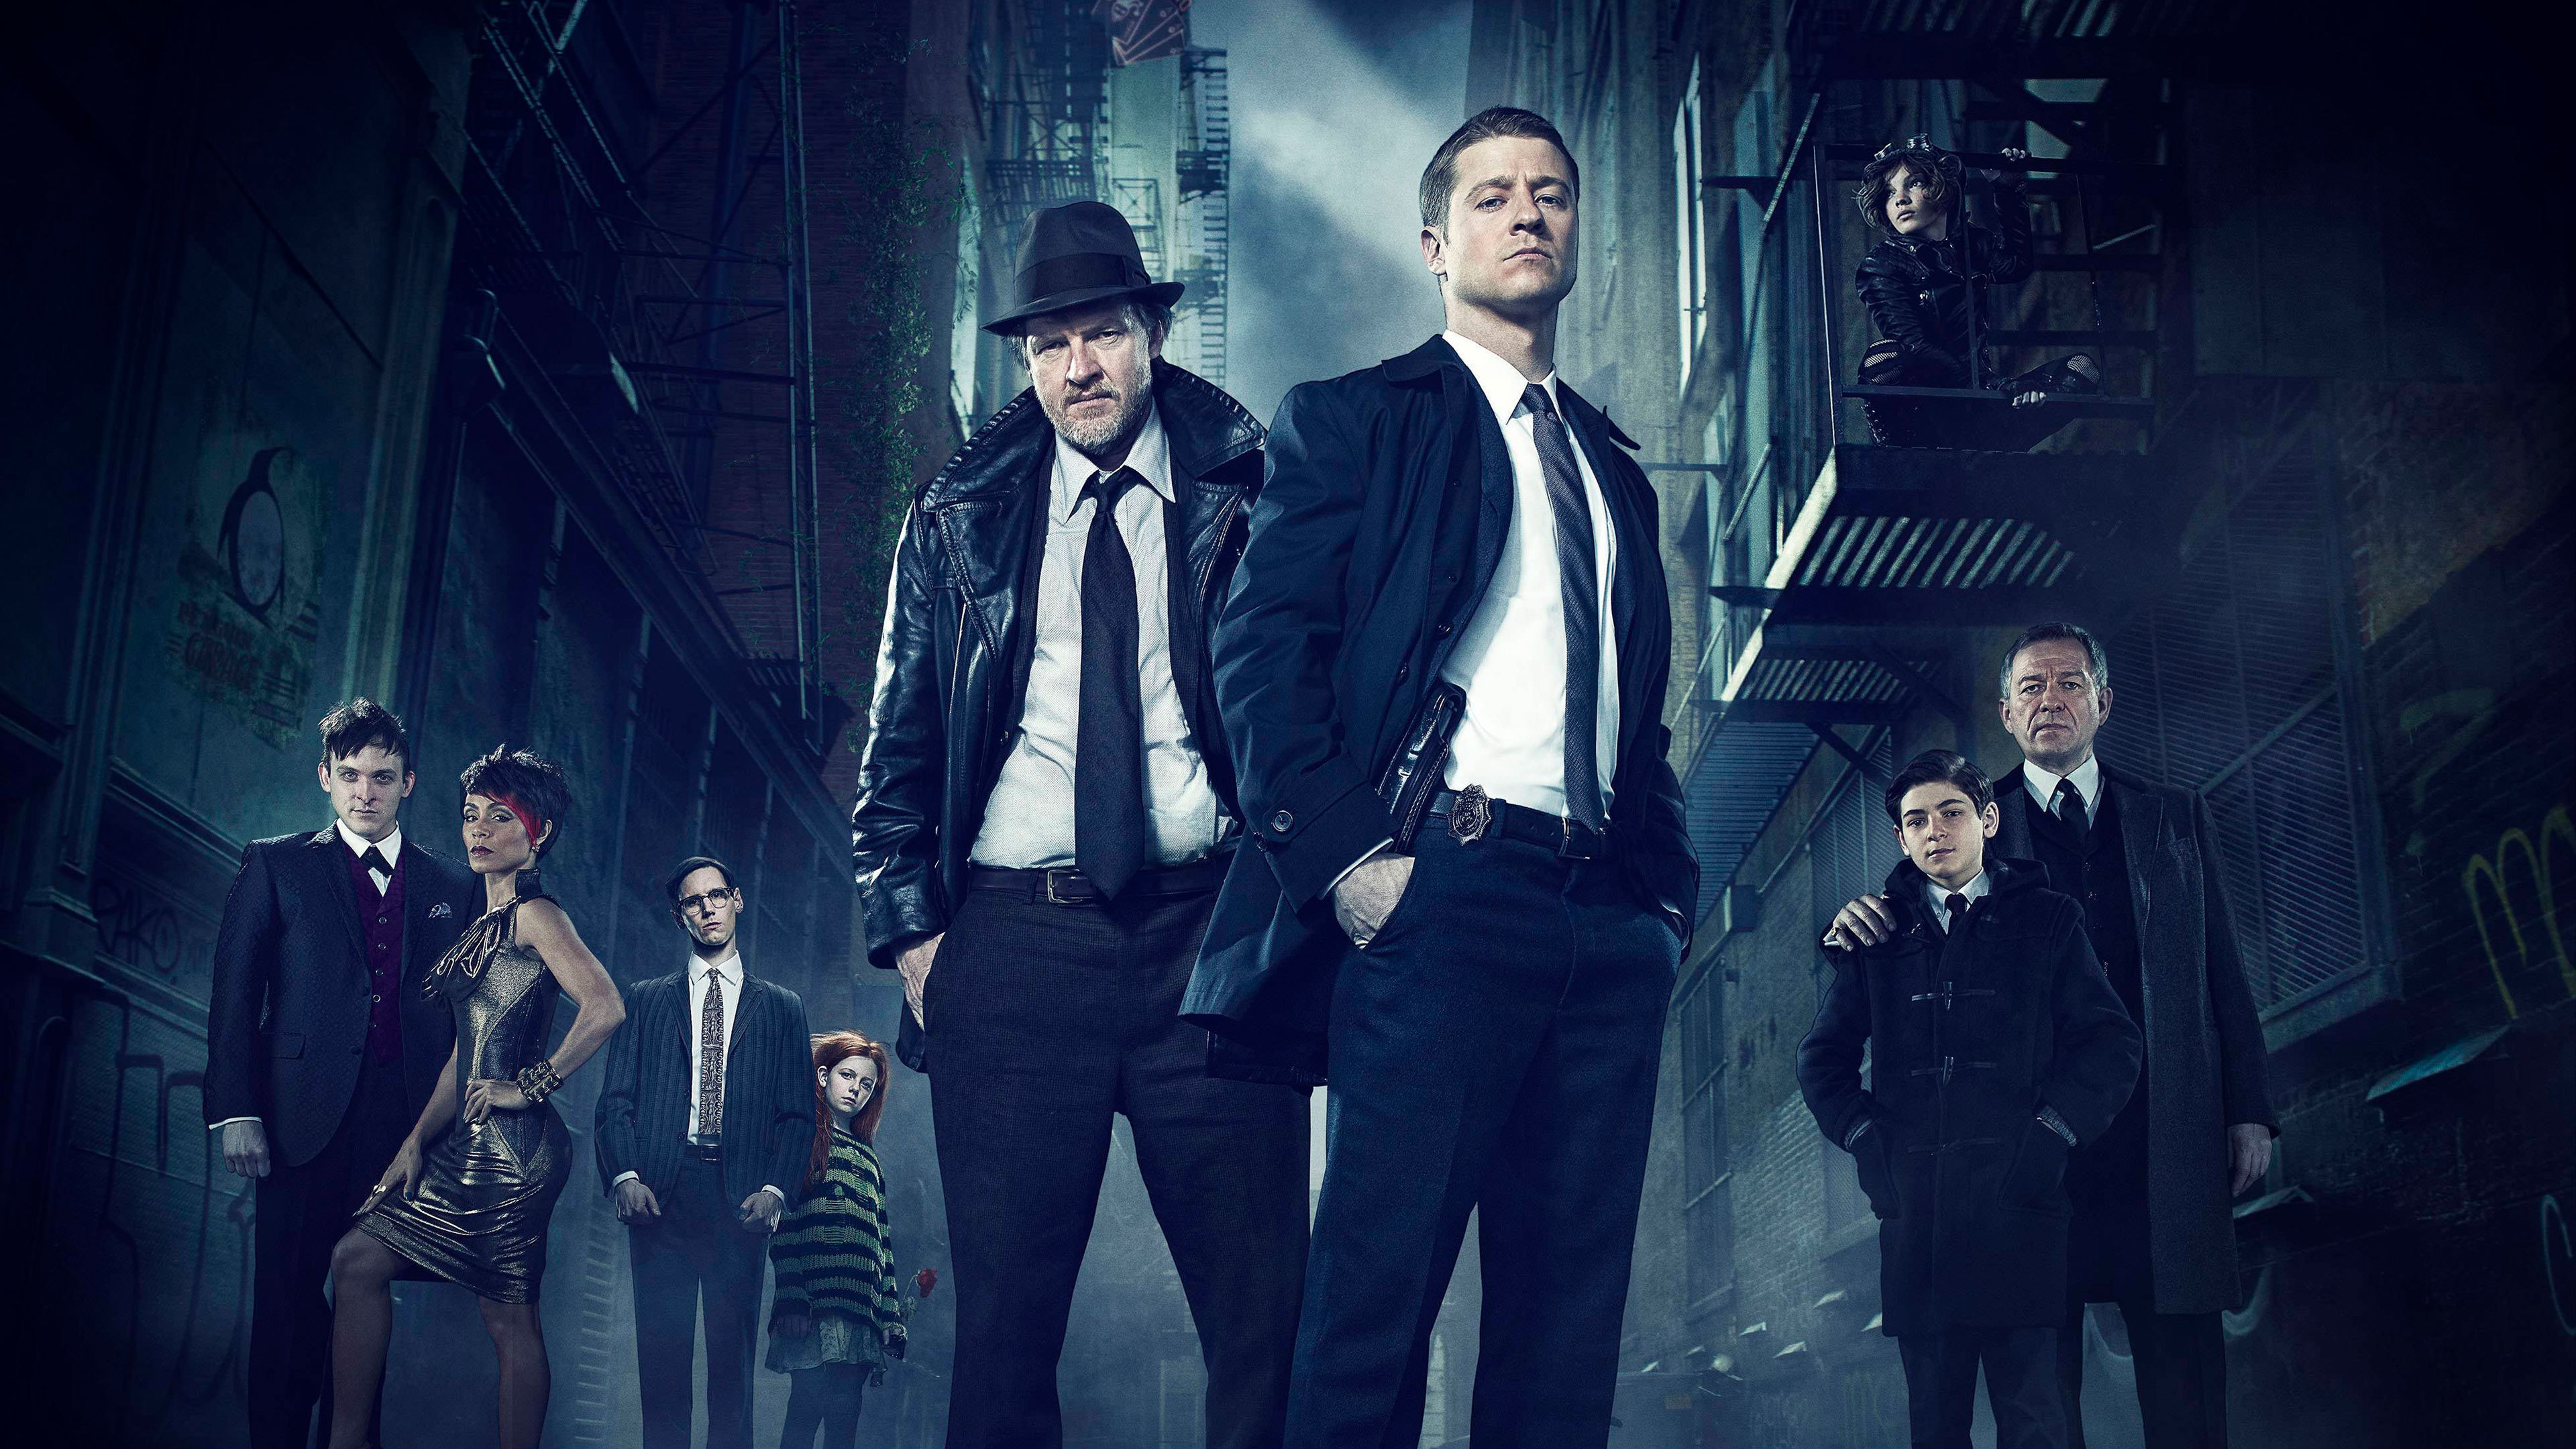 Gotham TV series, High-definition wallpapers, Iconic characters, Gotham City, 3840x2160 4K Desktop